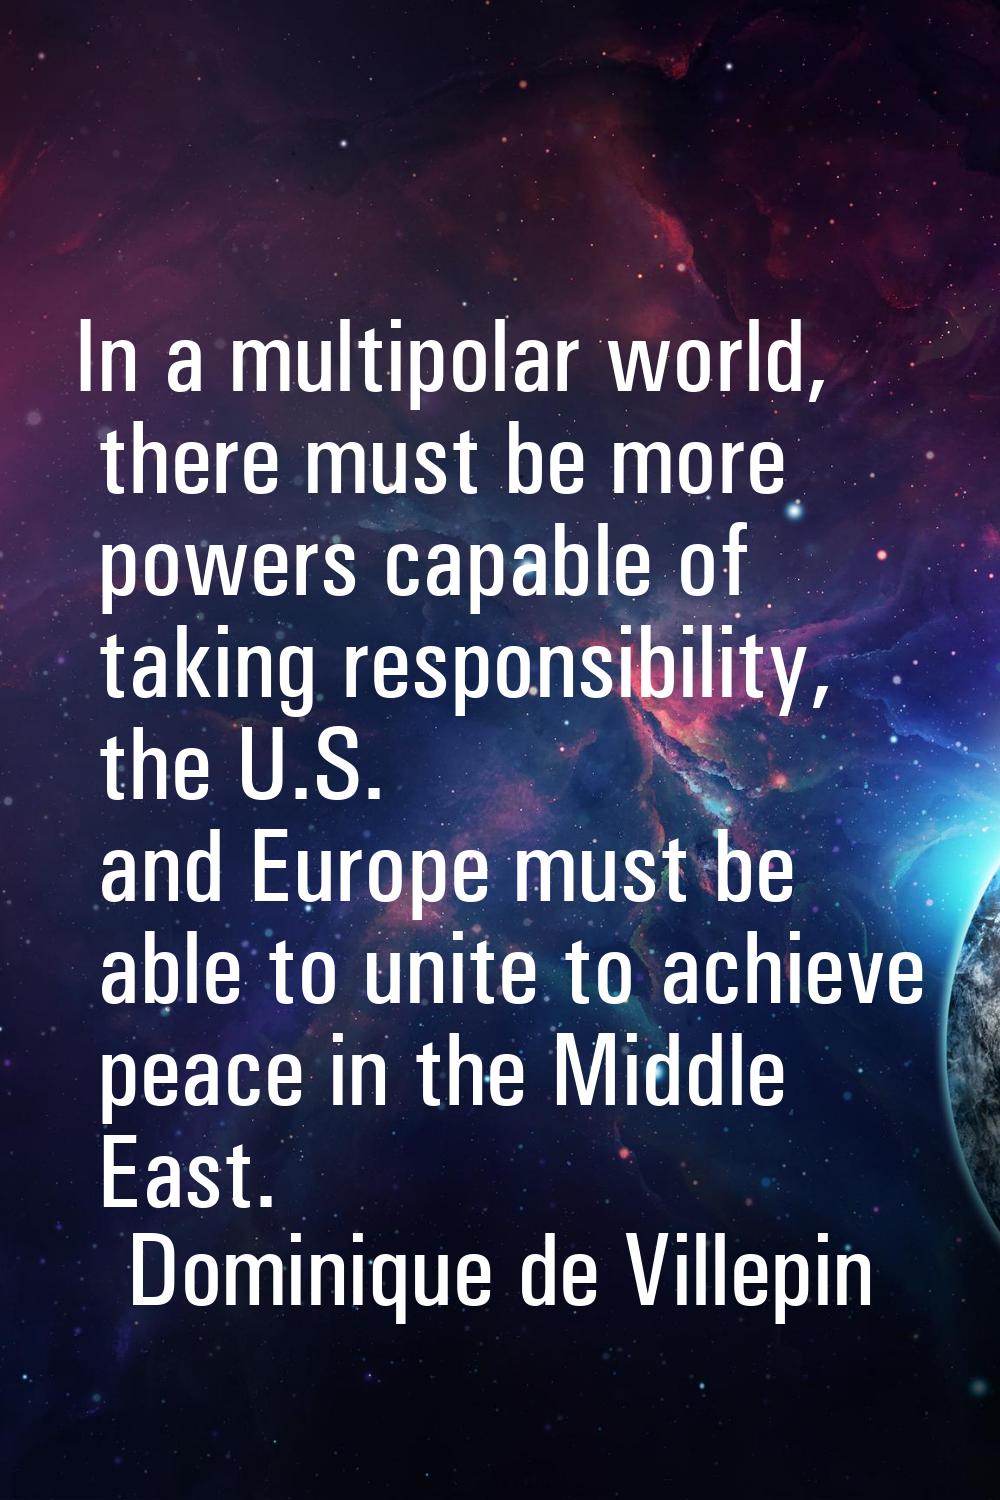 In a multipolar world, there must be more powers capable of taking responsibility, the U.S. and Eur